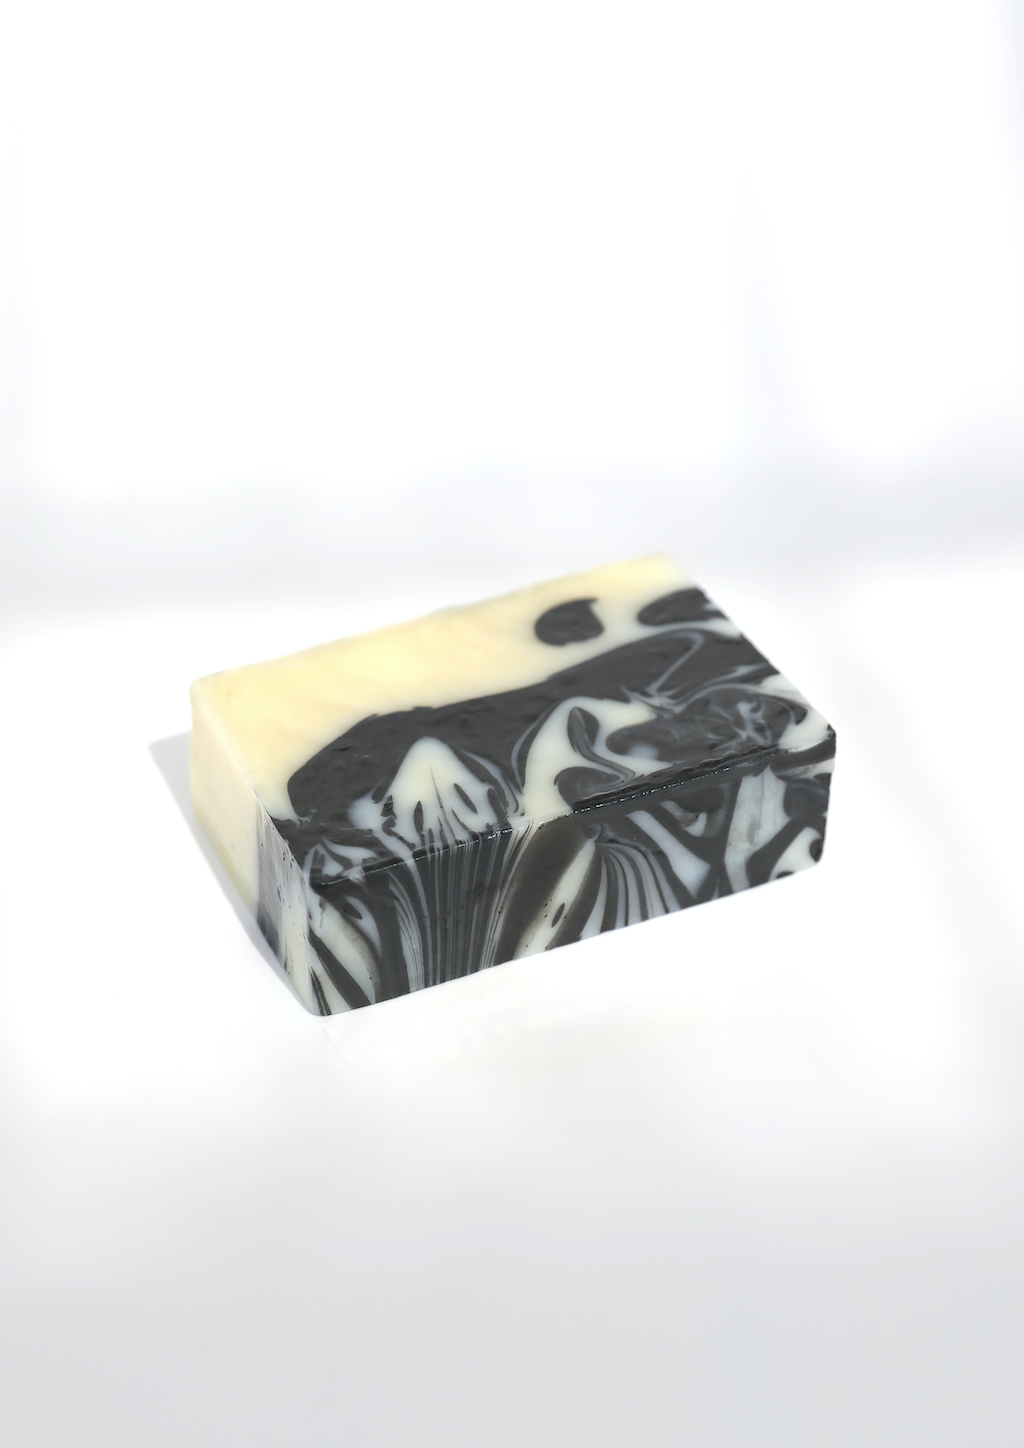 The white and blue marbled soap bar is pictured alone on a plain white background.